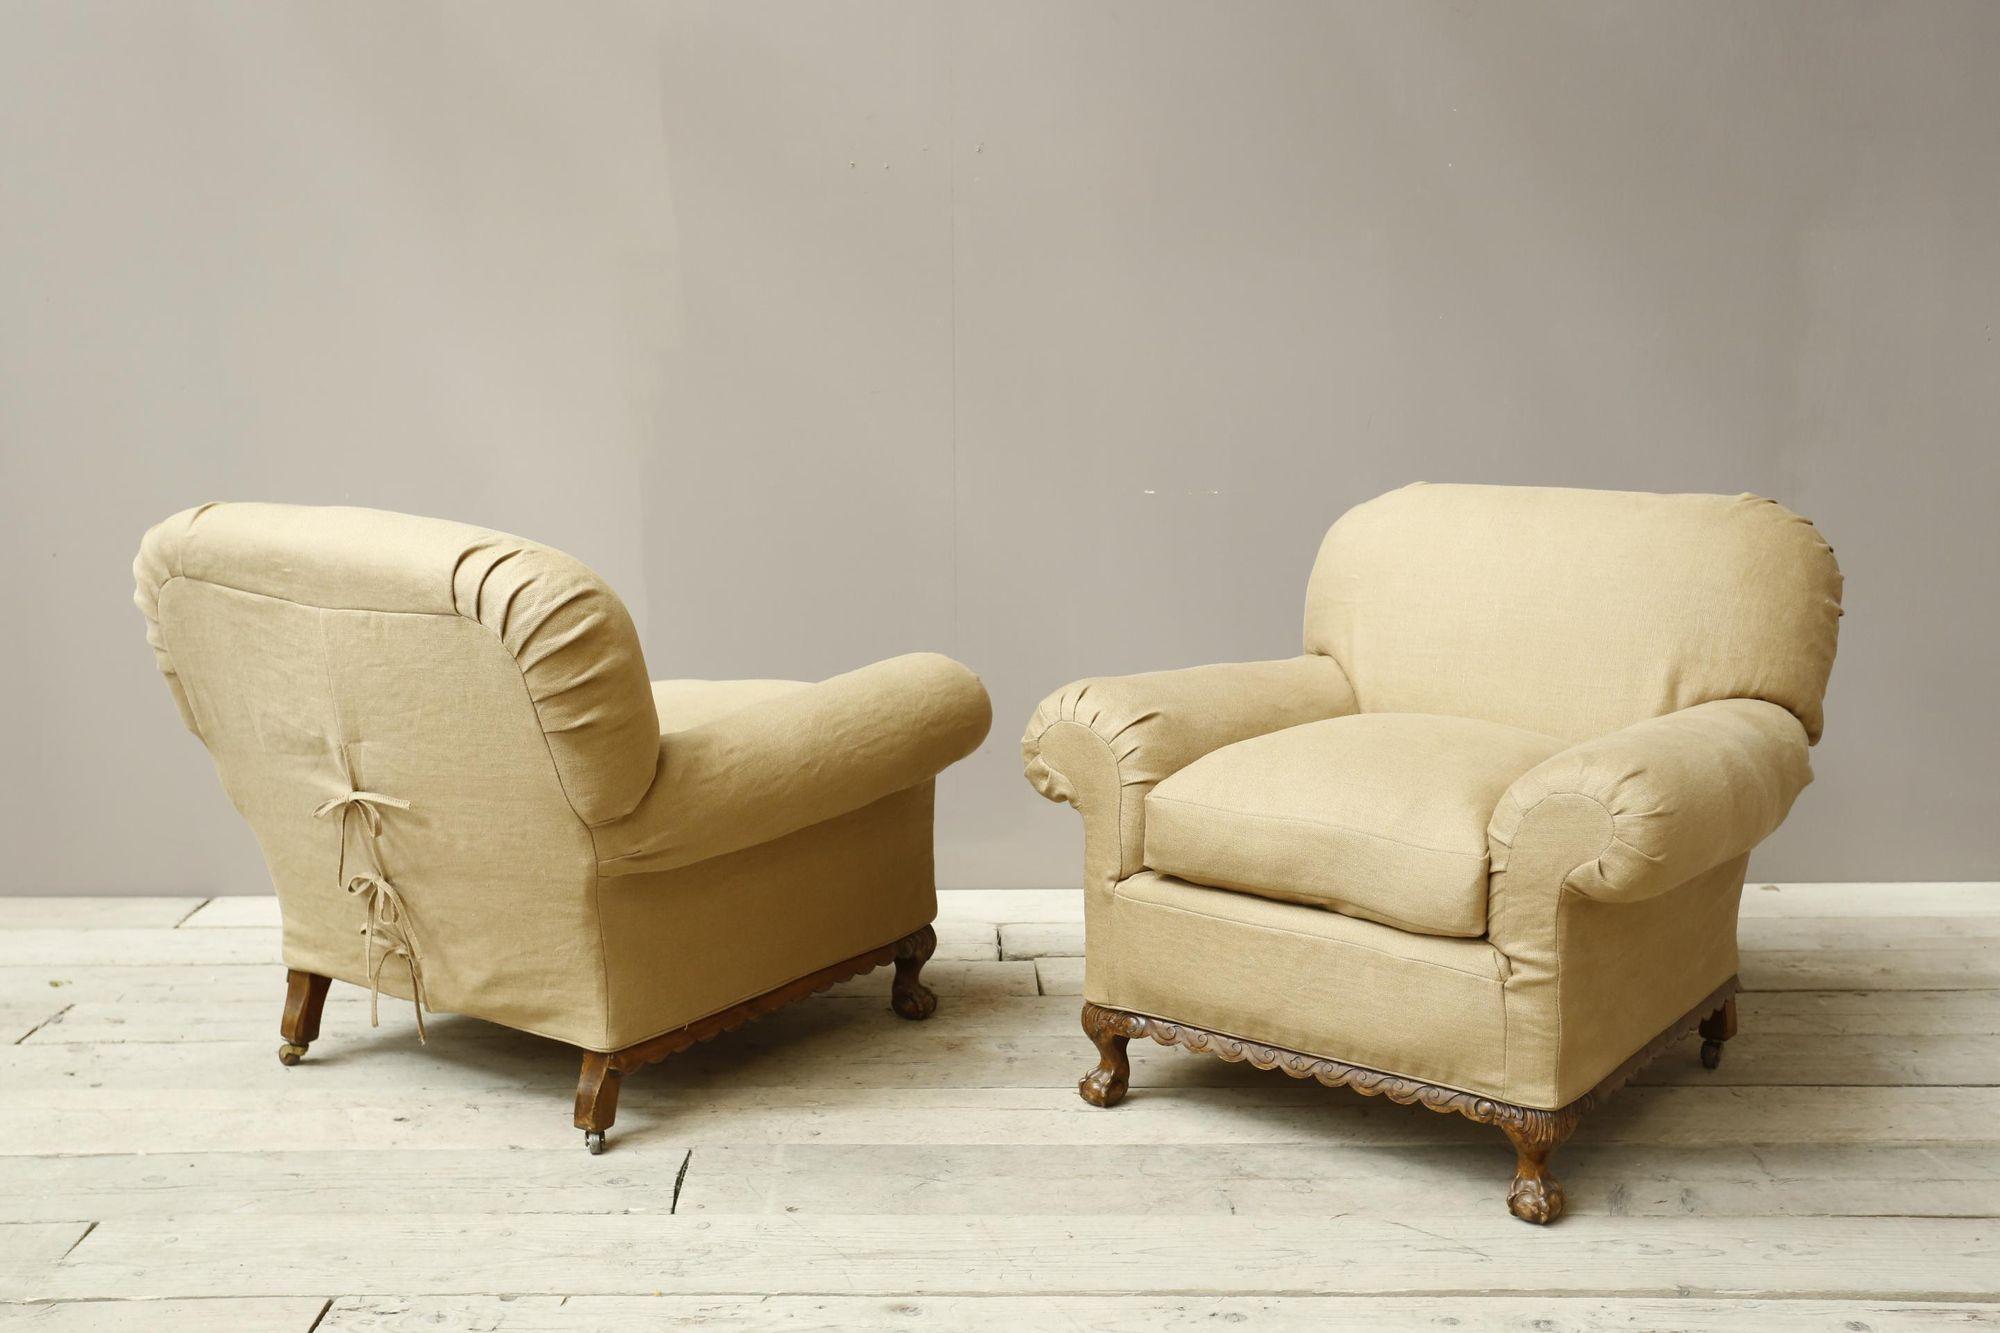 These are a very nice quality pair of Early 20th century Ball and claw country house armchairs. The size of them is superb and makes them hugely comfortable. We have chosen to upholster them in a 100% natural Linen slip cover with a tied back which